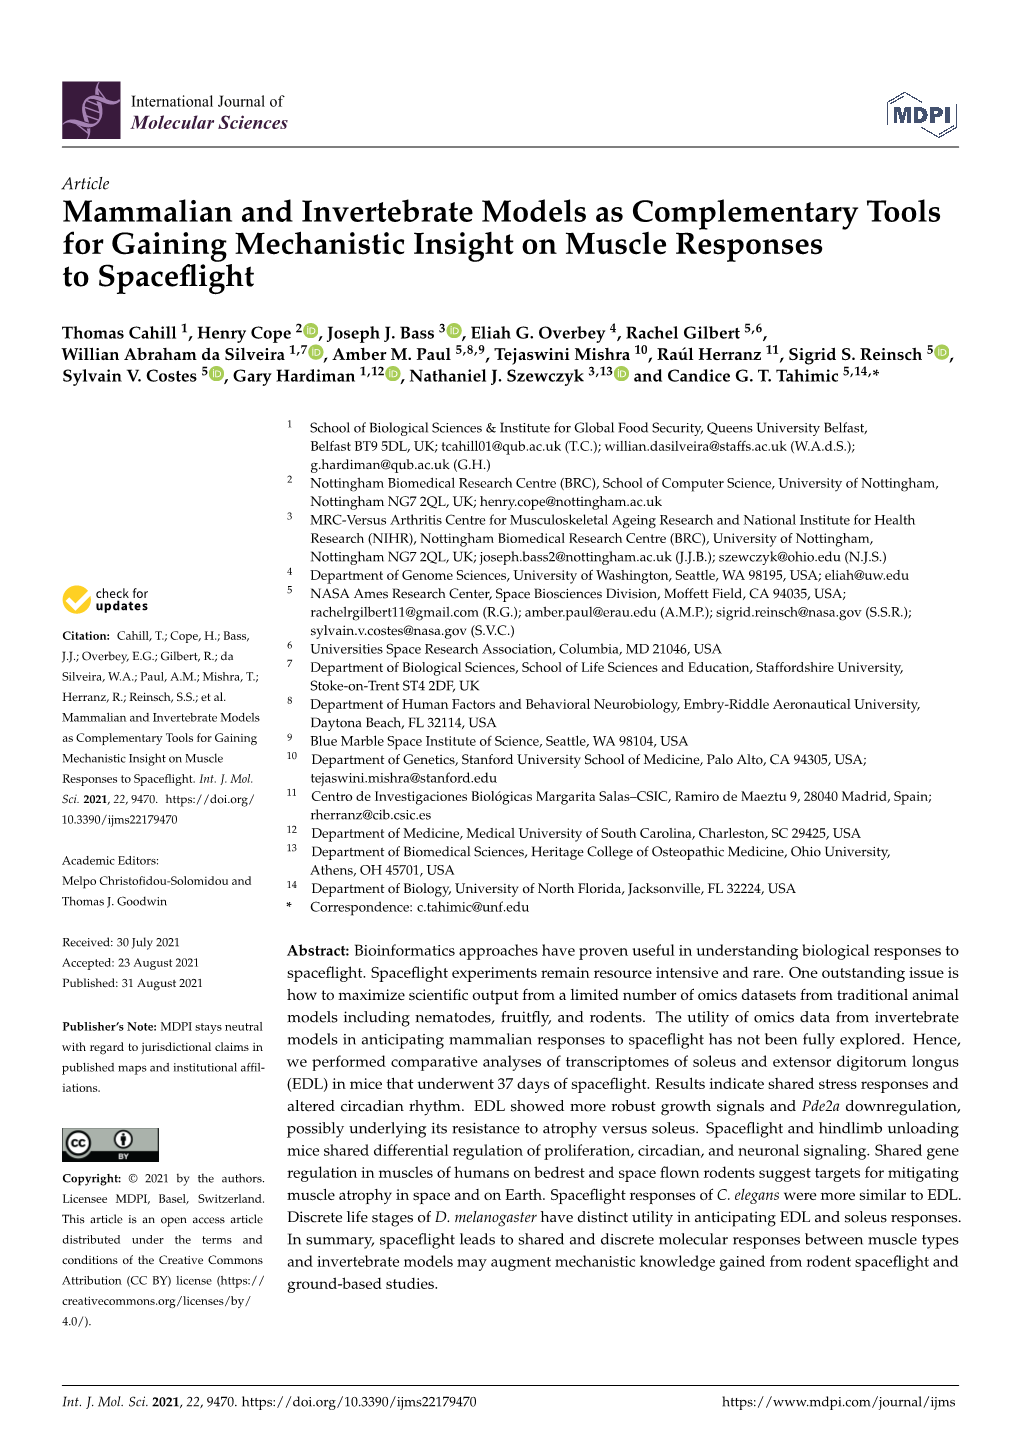 Mammalian and Invertebrate Models As Complementary Tools for Gaining Mechanistic Insight on Muscle Responses to Spaceﬂight